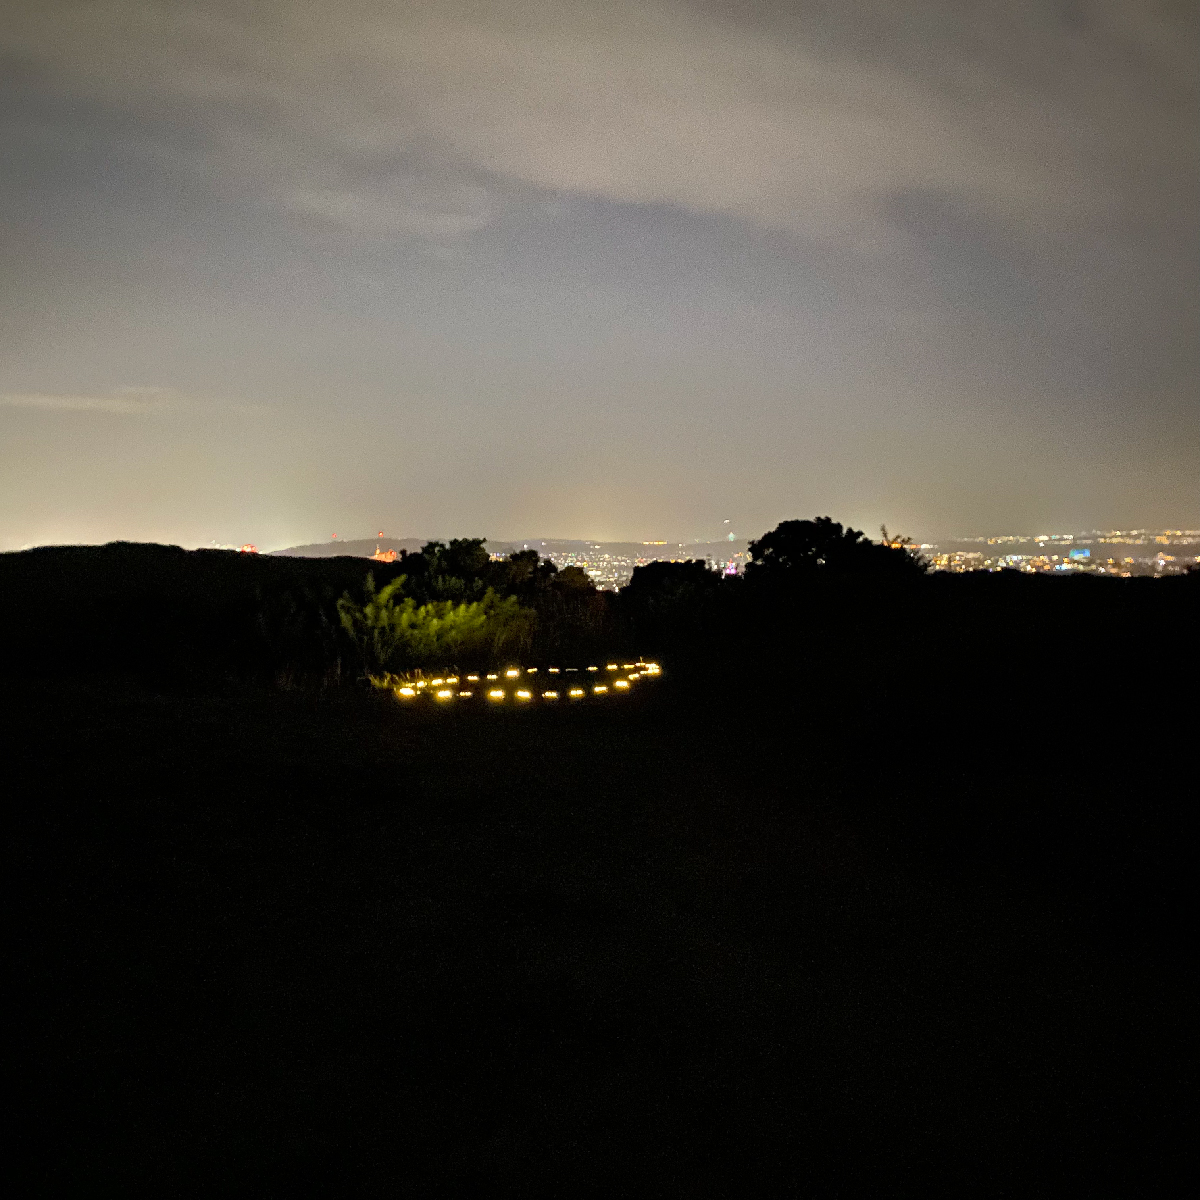 A ring of solar powered lights in a garden at night.